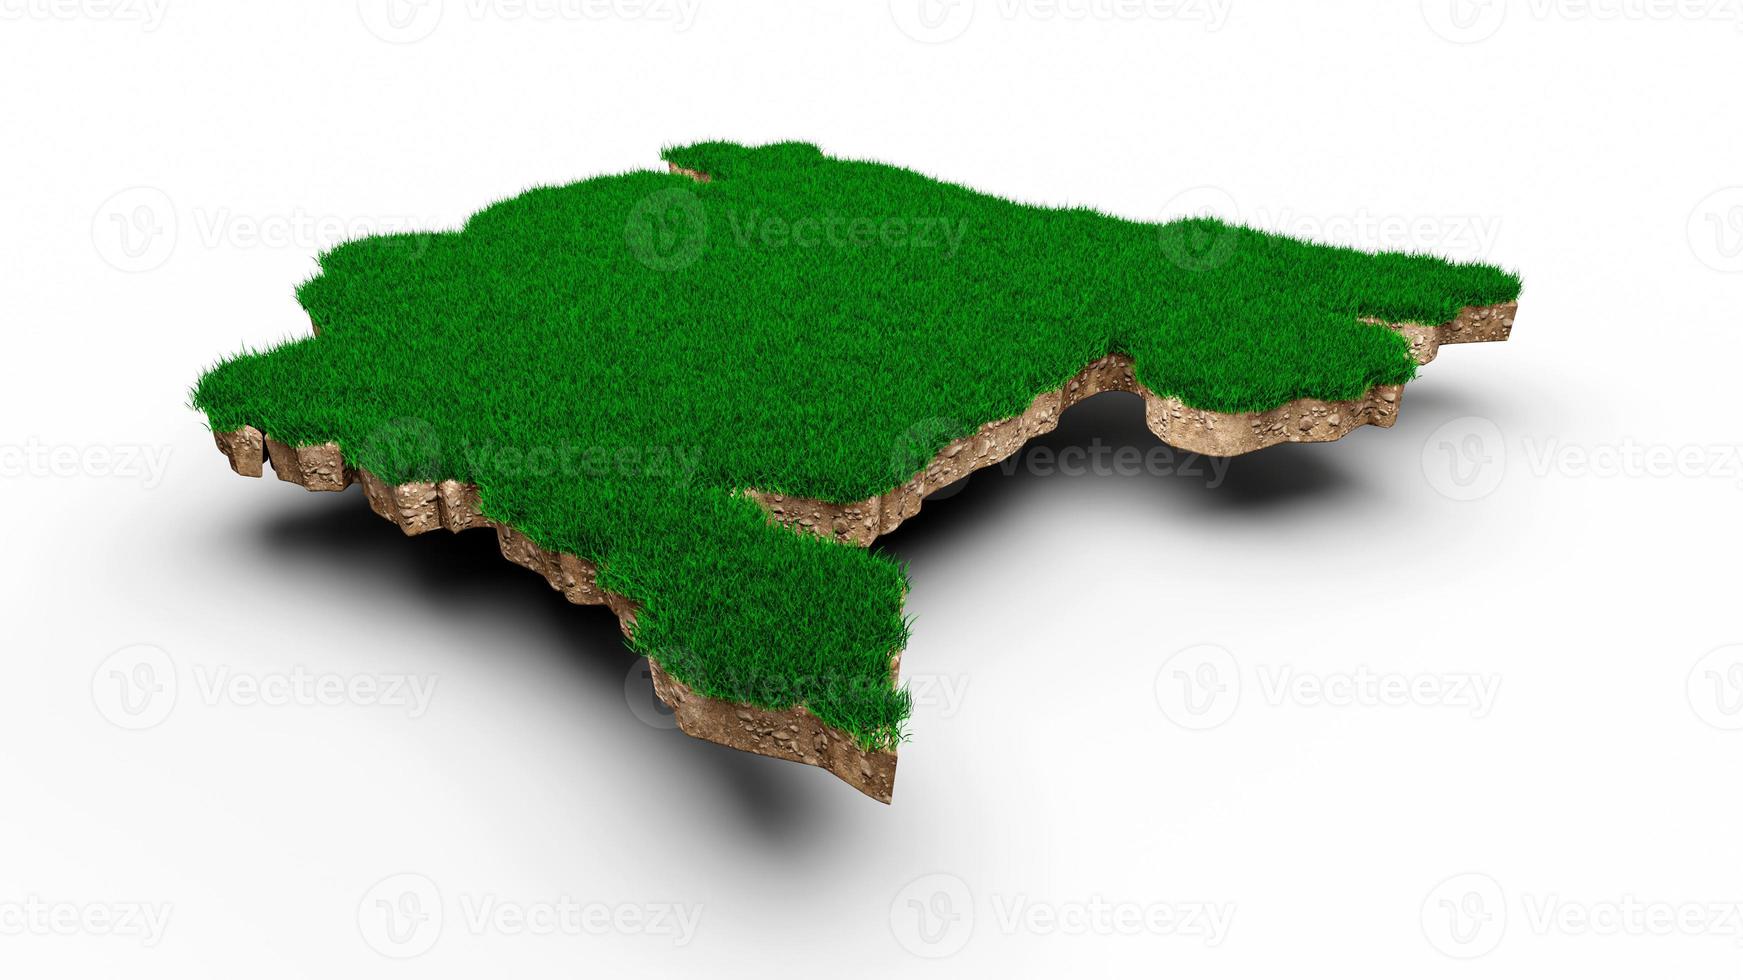 Montenegro Map soil land geology cross section with green grass and Rock ground texture 3d illustration photo